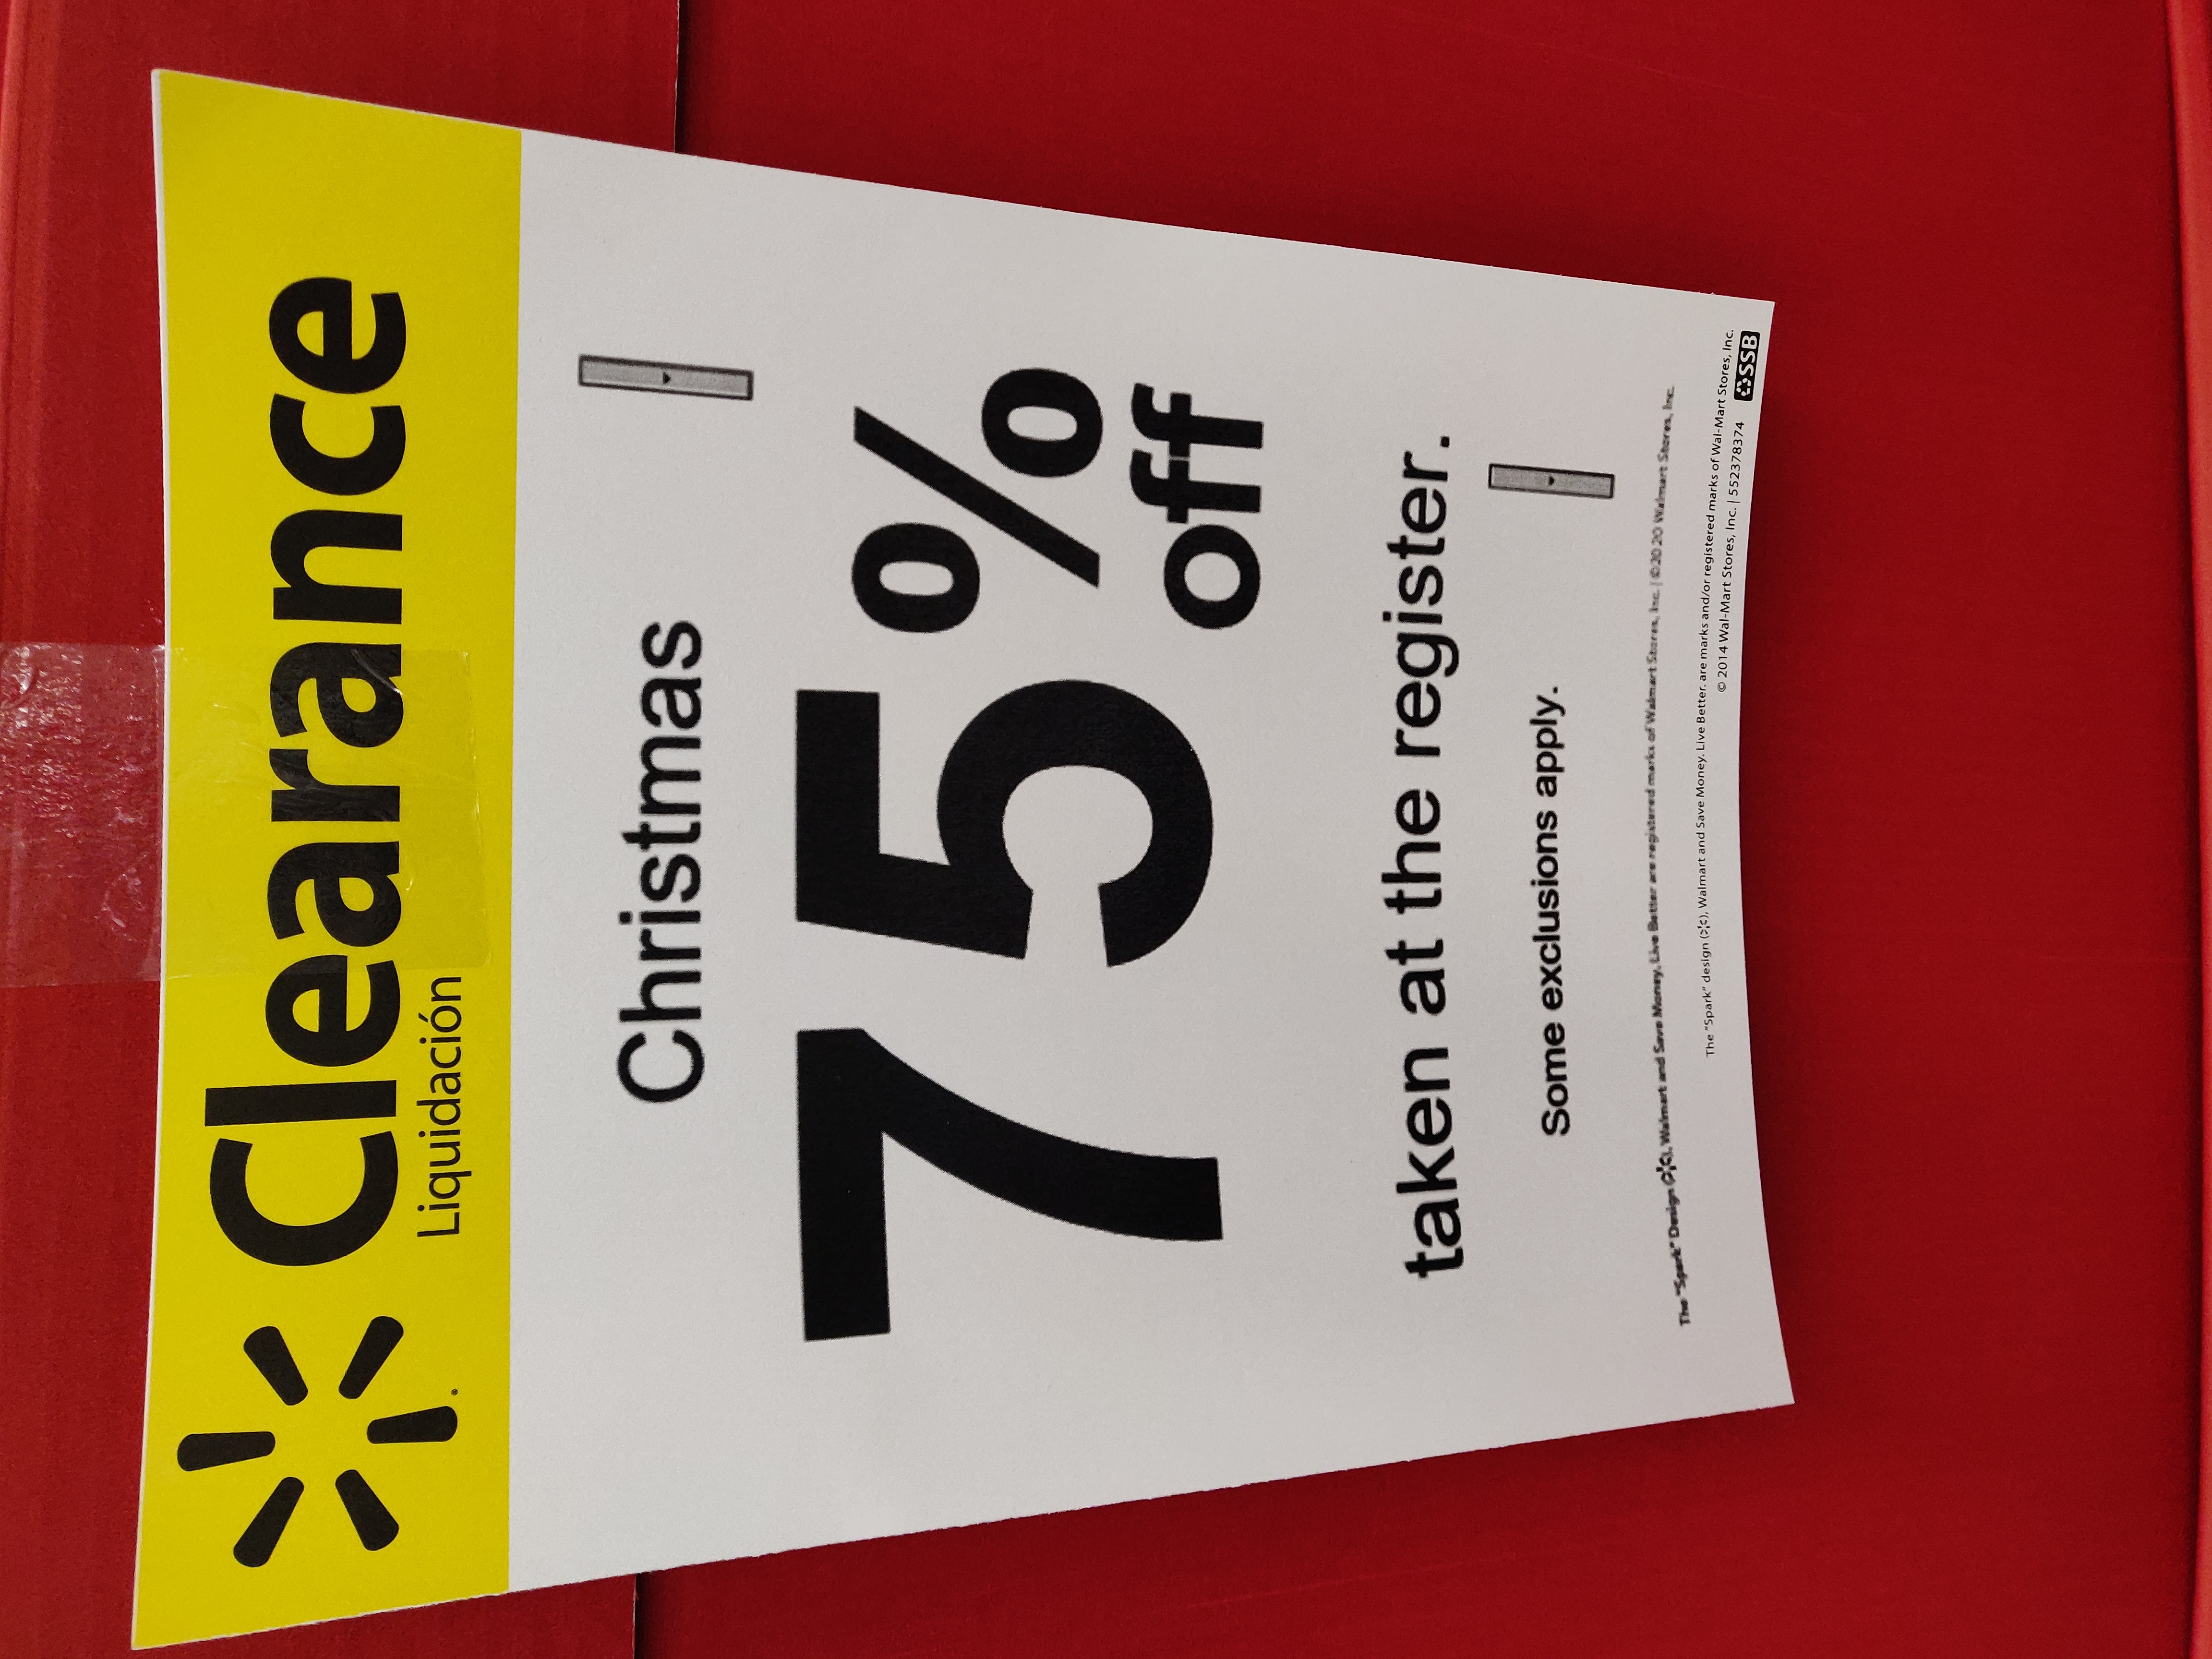 75% Off Christmas Clearance at Walmart!